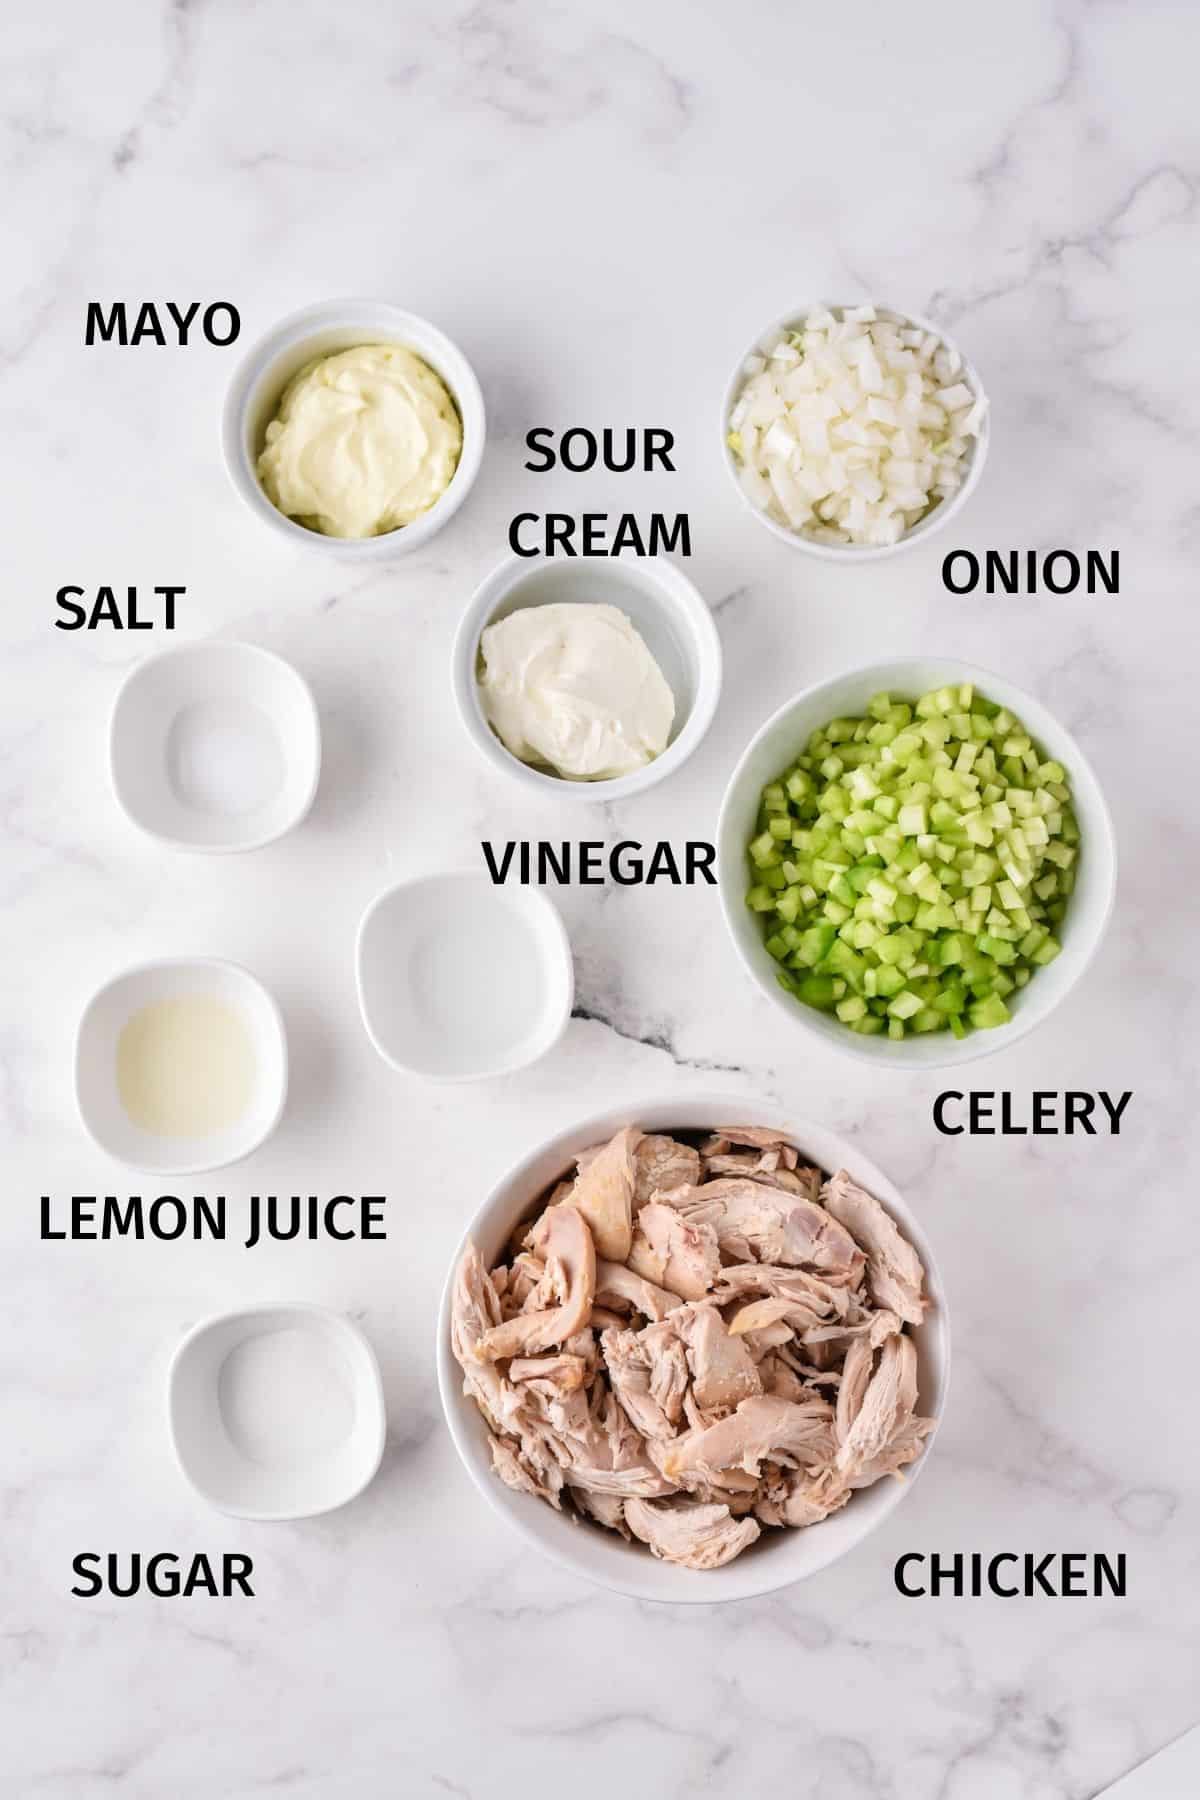 Ingredients to make chicken salad in small bowls on a white surface.